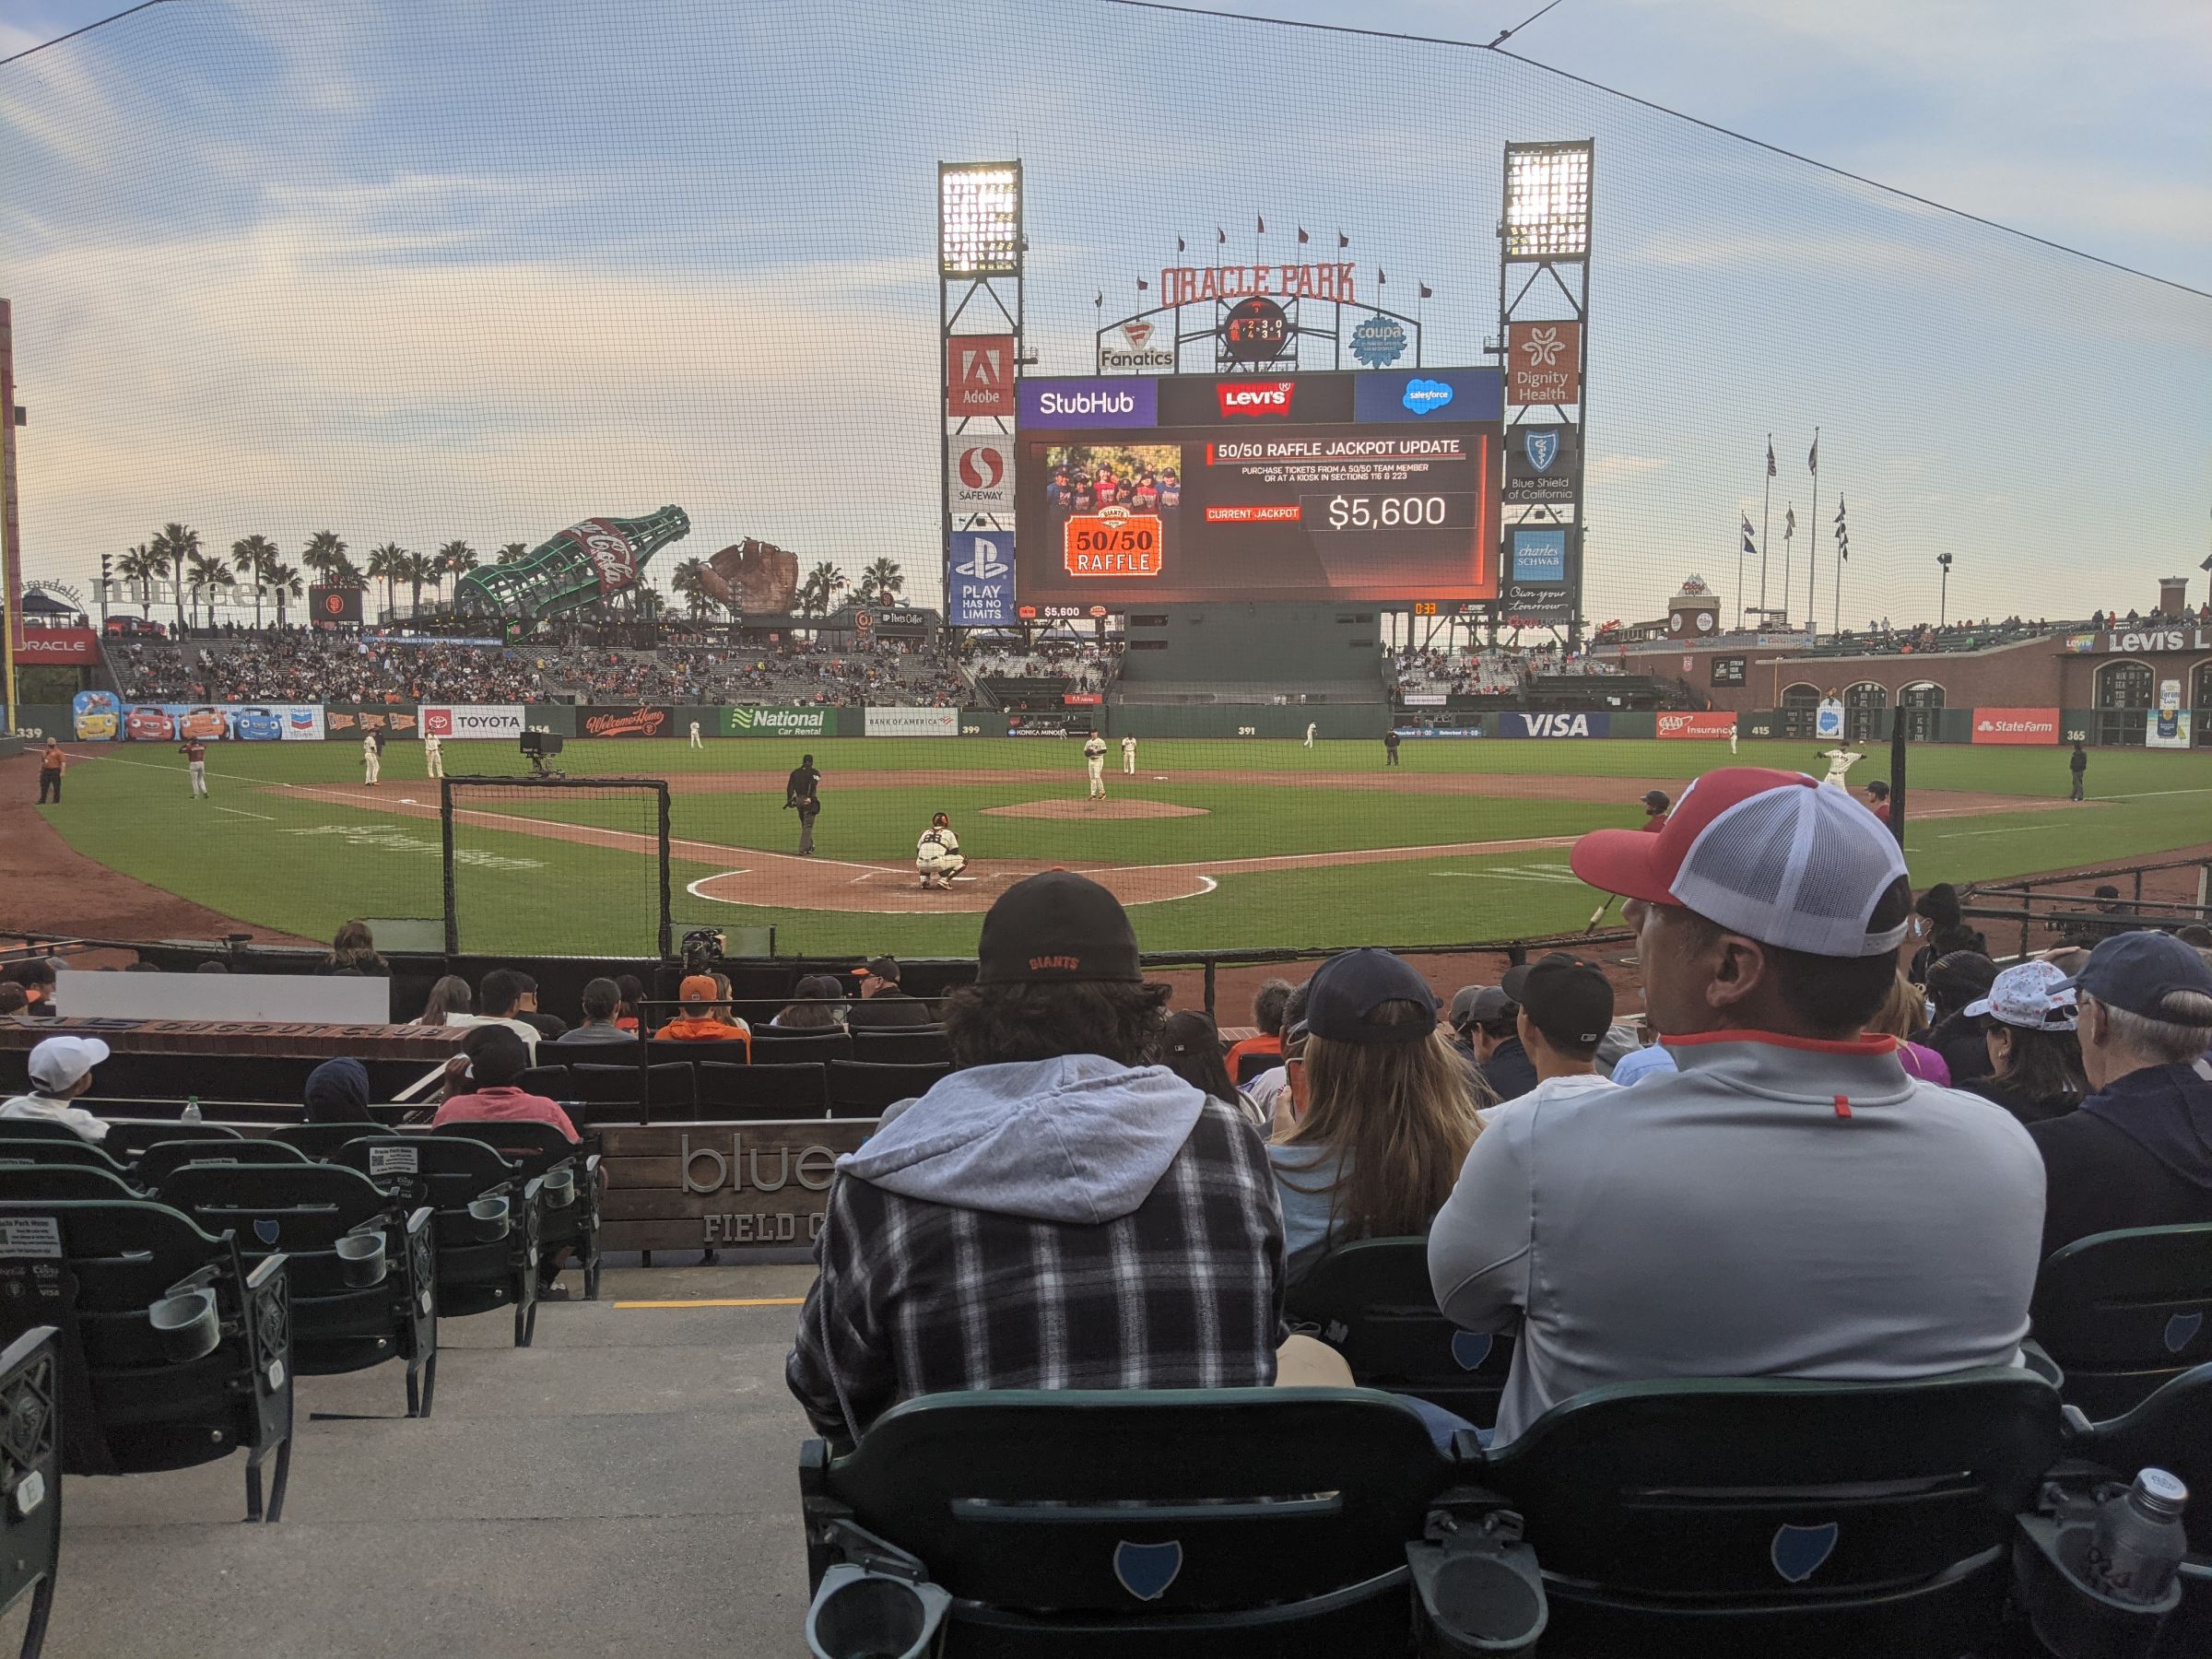 Section 113 at Oracle Park 